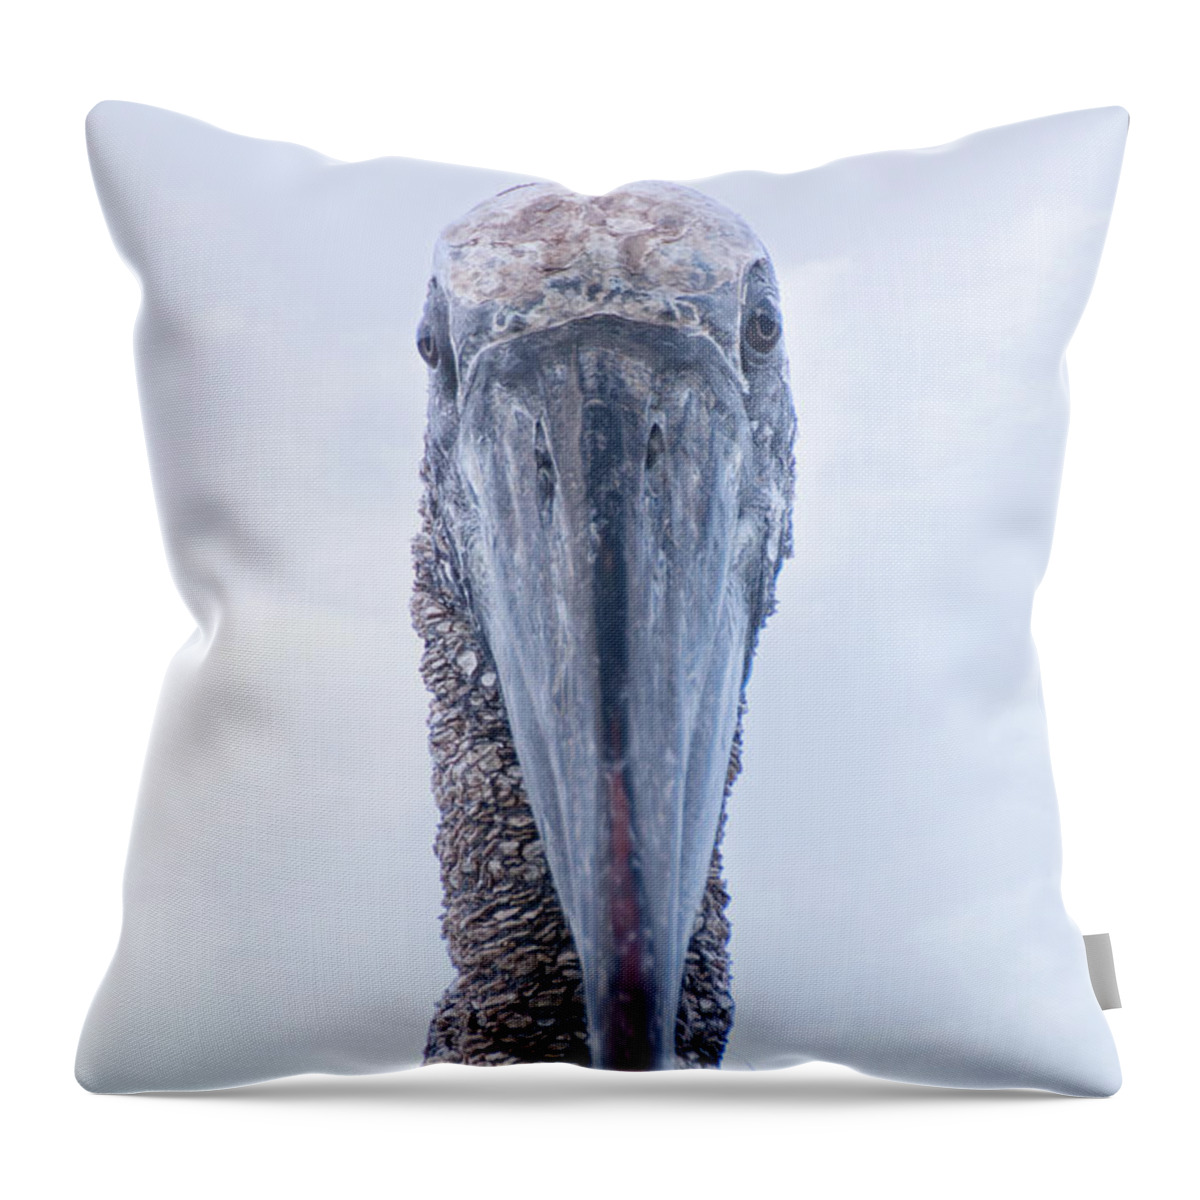 Wood Stork Throw Pillow featuring the photograph Wood Stork Says Hi by Mark Andrew Thomas